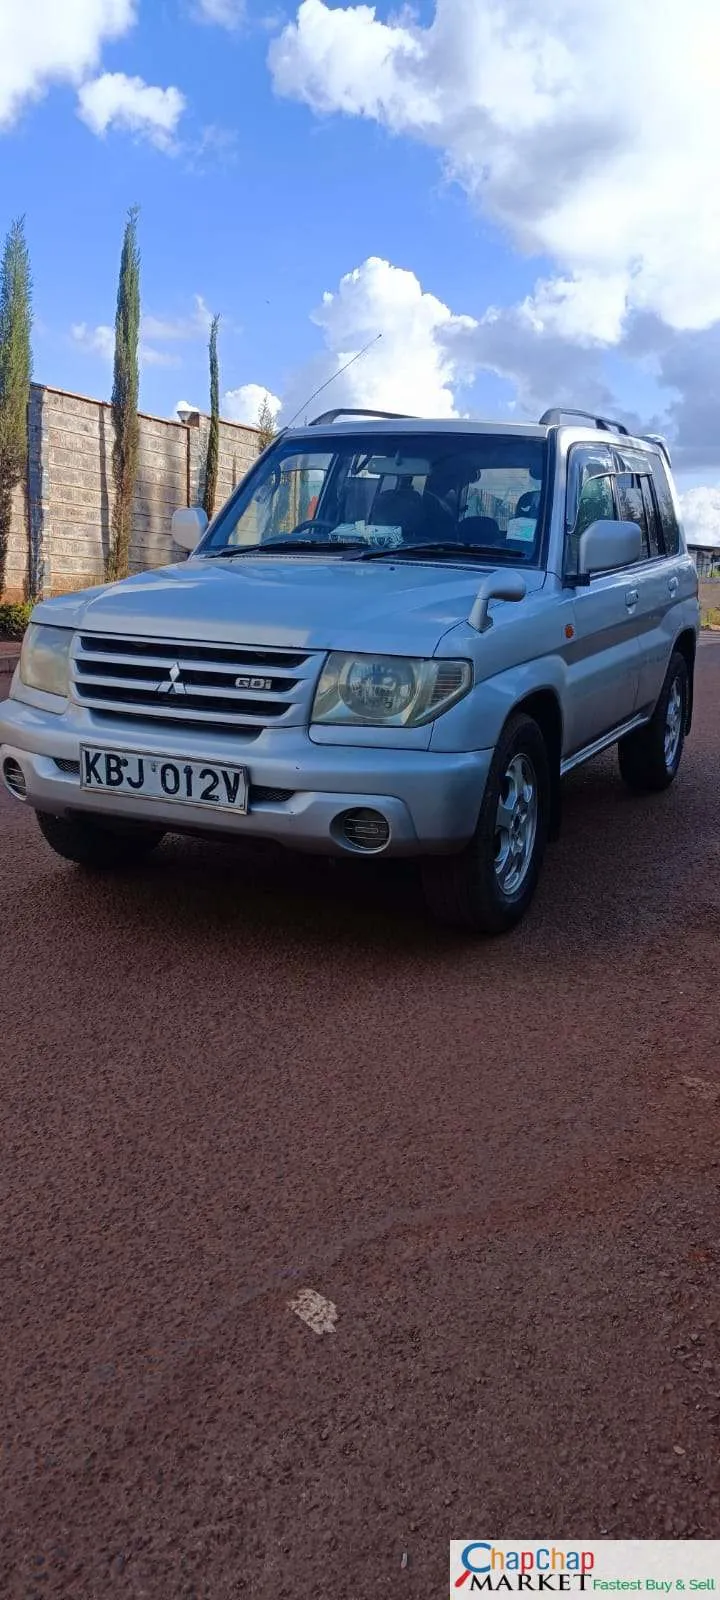 Cars Cars For Sale/Vehicles-Mitsubishi Pajero IO QUICK SALE You Pay 30% Deposit Trade in Ok EXCLUSIVE 4